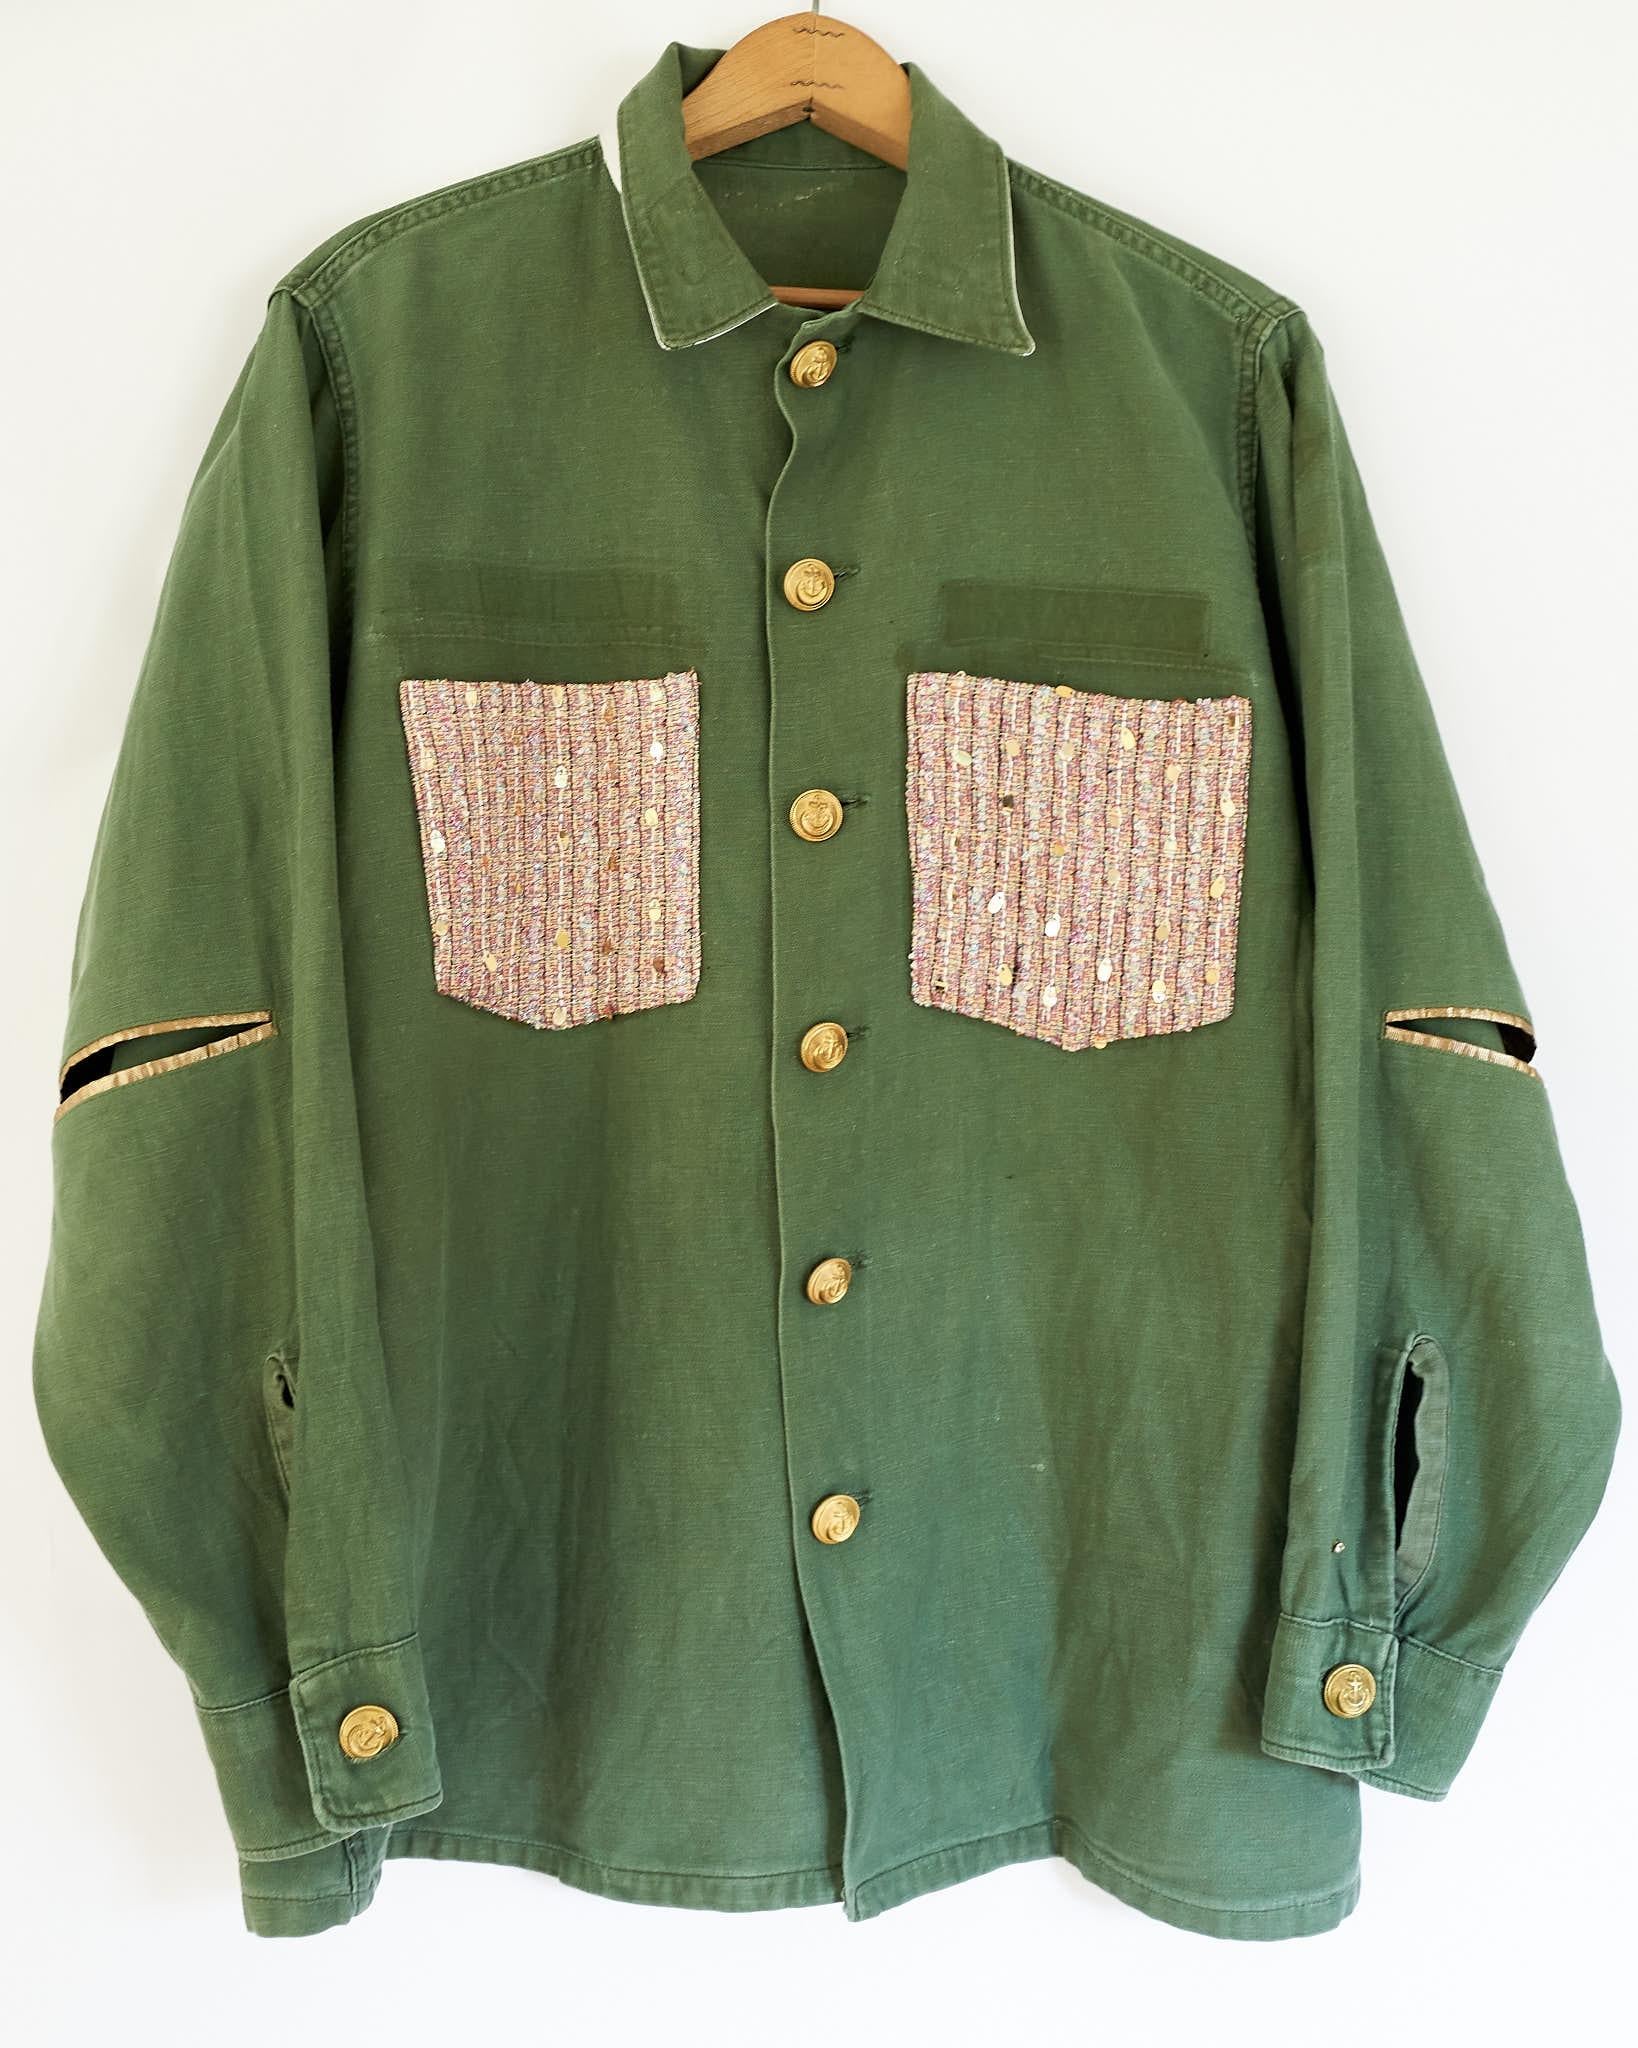 Jacket Green Designer Pink Sequin Tweed White Silk Embellished Military
Brand: J Dauphin
Size: Large
Sustainable Luxury, Up-cycled and Re-purposed Vintage

Our Up-cycled Vintage Jackets are made from vintage, natural fibers, military clothing and